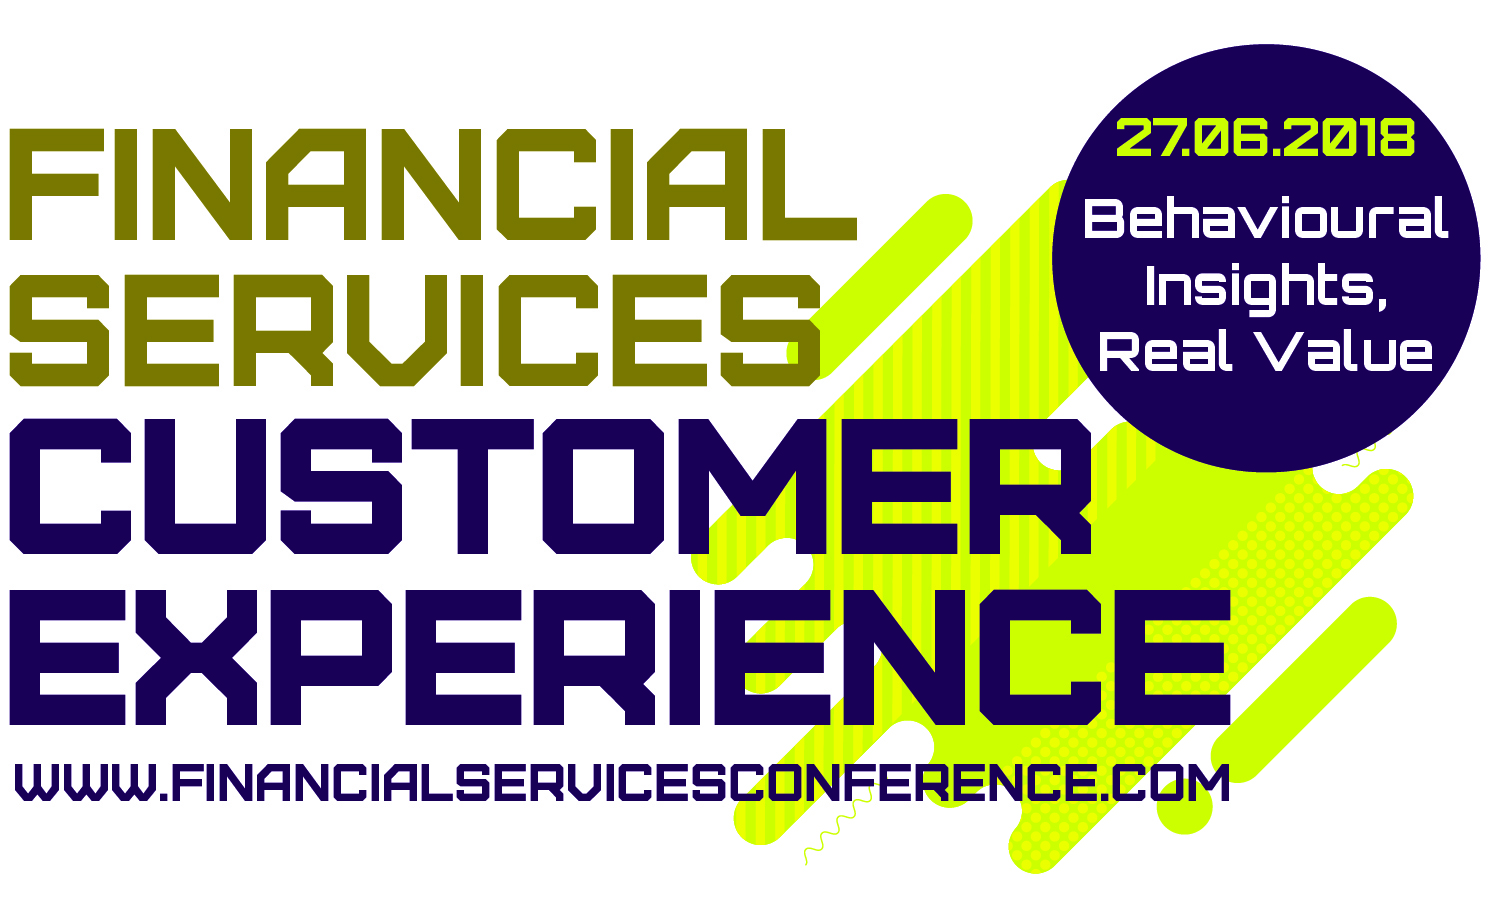 The Financial Services Customer Experience Conference - Behavioural Insights, Real Value